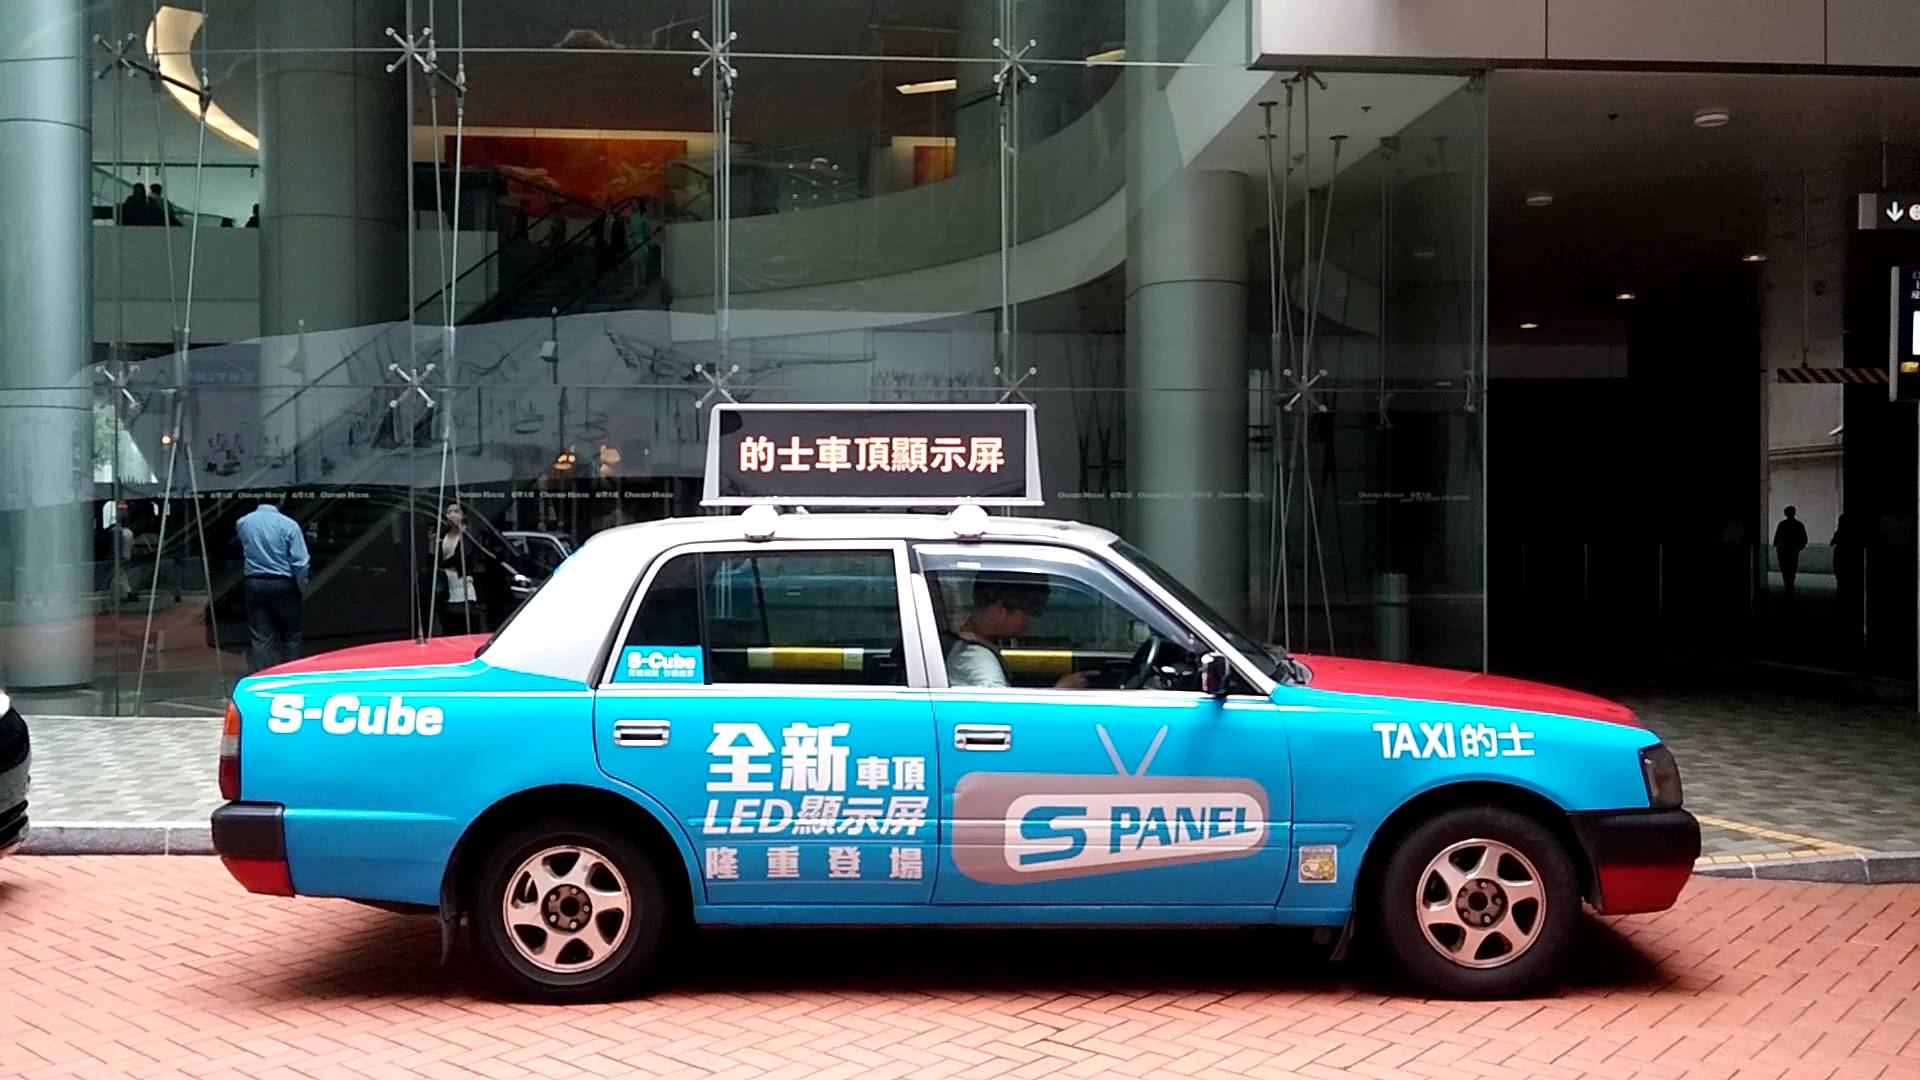 S Panel new LED Taxi Top in Hong Kong